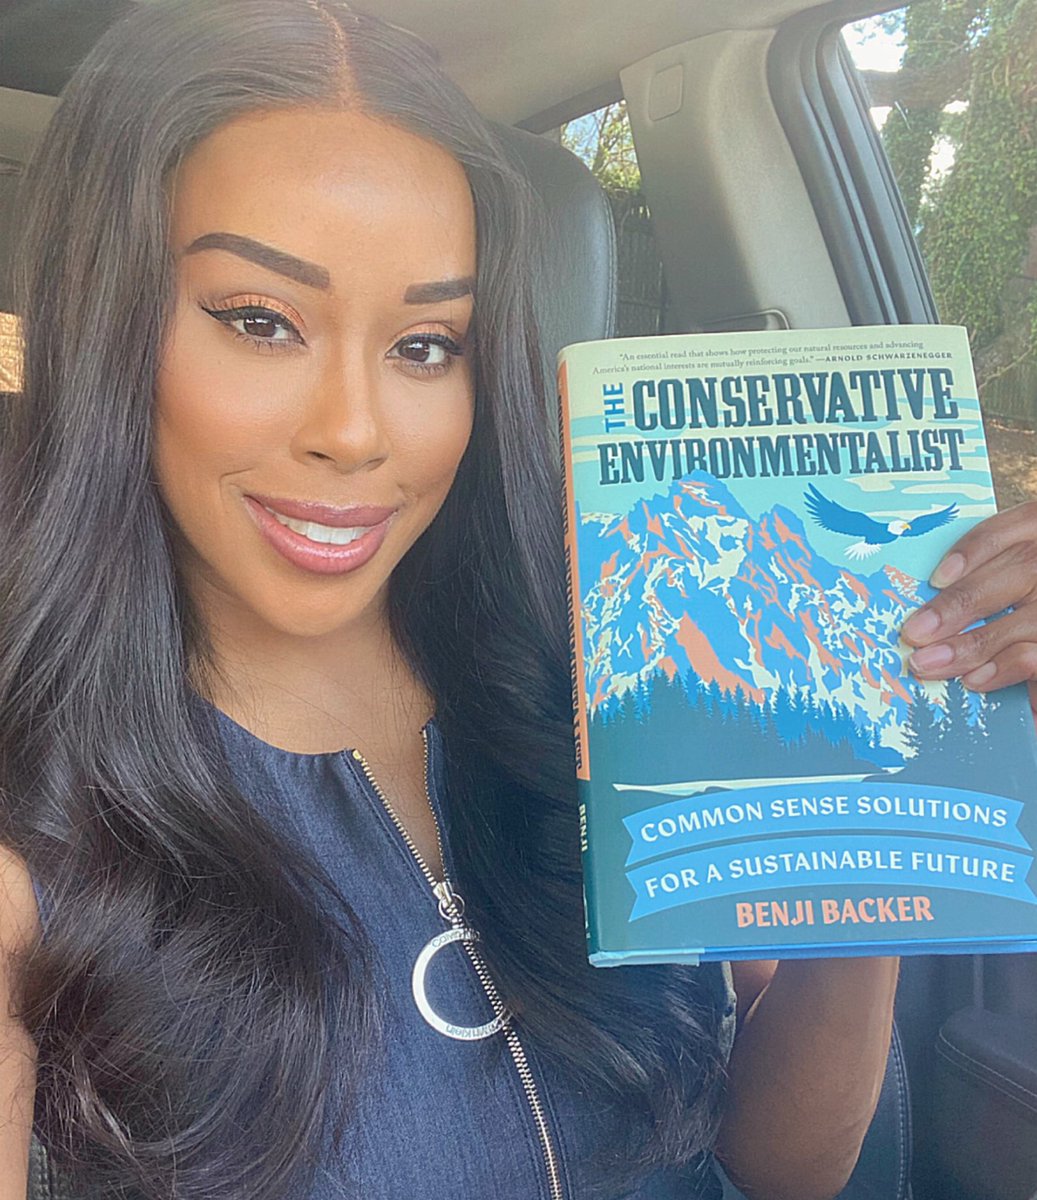 On this beautiful #EarthDay, I would like to recommend this thoughtful book by @BenjiBacker. Learn about common sense solutions for a sustainable future without the #GreenNewDeal gaslighting. Grab A Copy- amazon.com/Conservative-E…